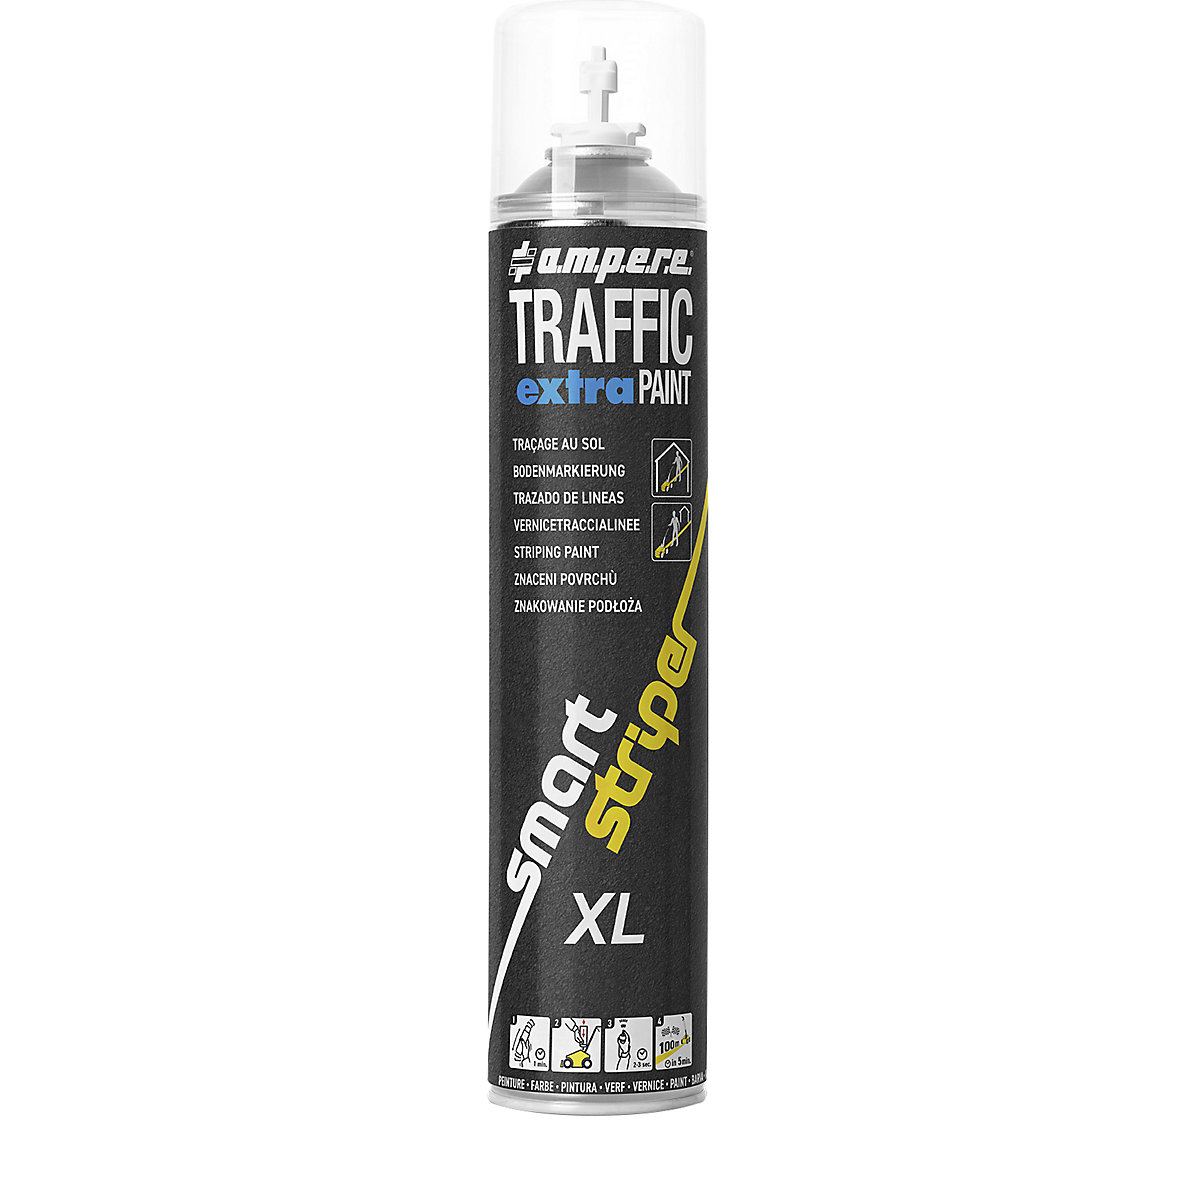 Traffic extra Paint® XL marking paint – Ampere, contents 750 ml, pack of 6, white-2